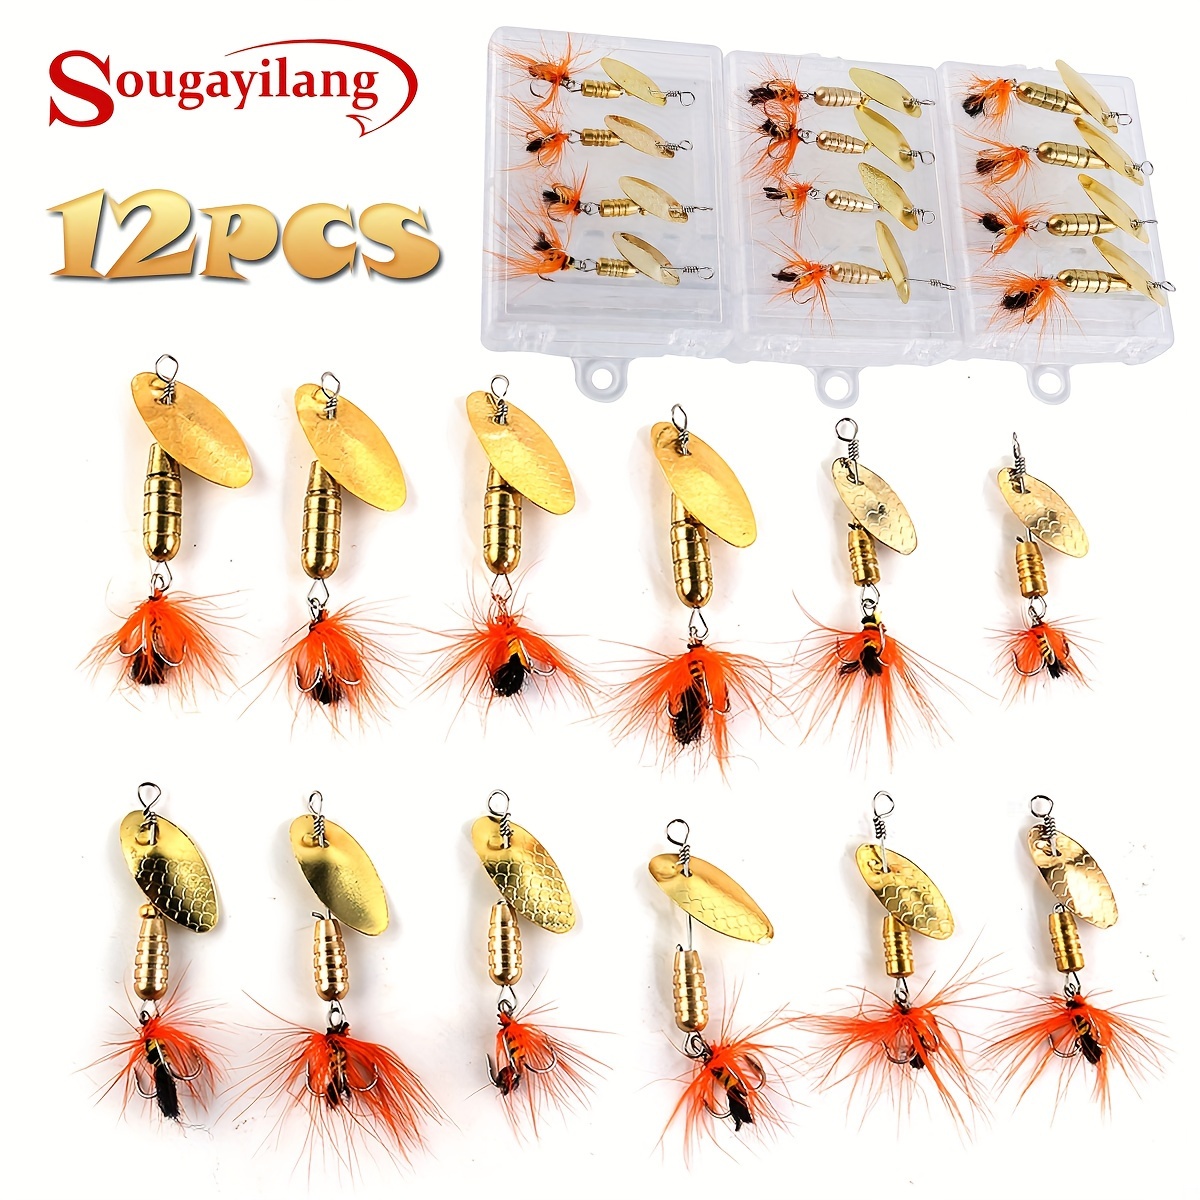 Mini-Spinner-Baits-for-Bass-Fishing-Lures-Colorado-Spinnerbait-Top-Water-Fishing-Lures-Micro-Spinner-Smallmouth-Bass-Lure  Small Water Hard Baits Pan